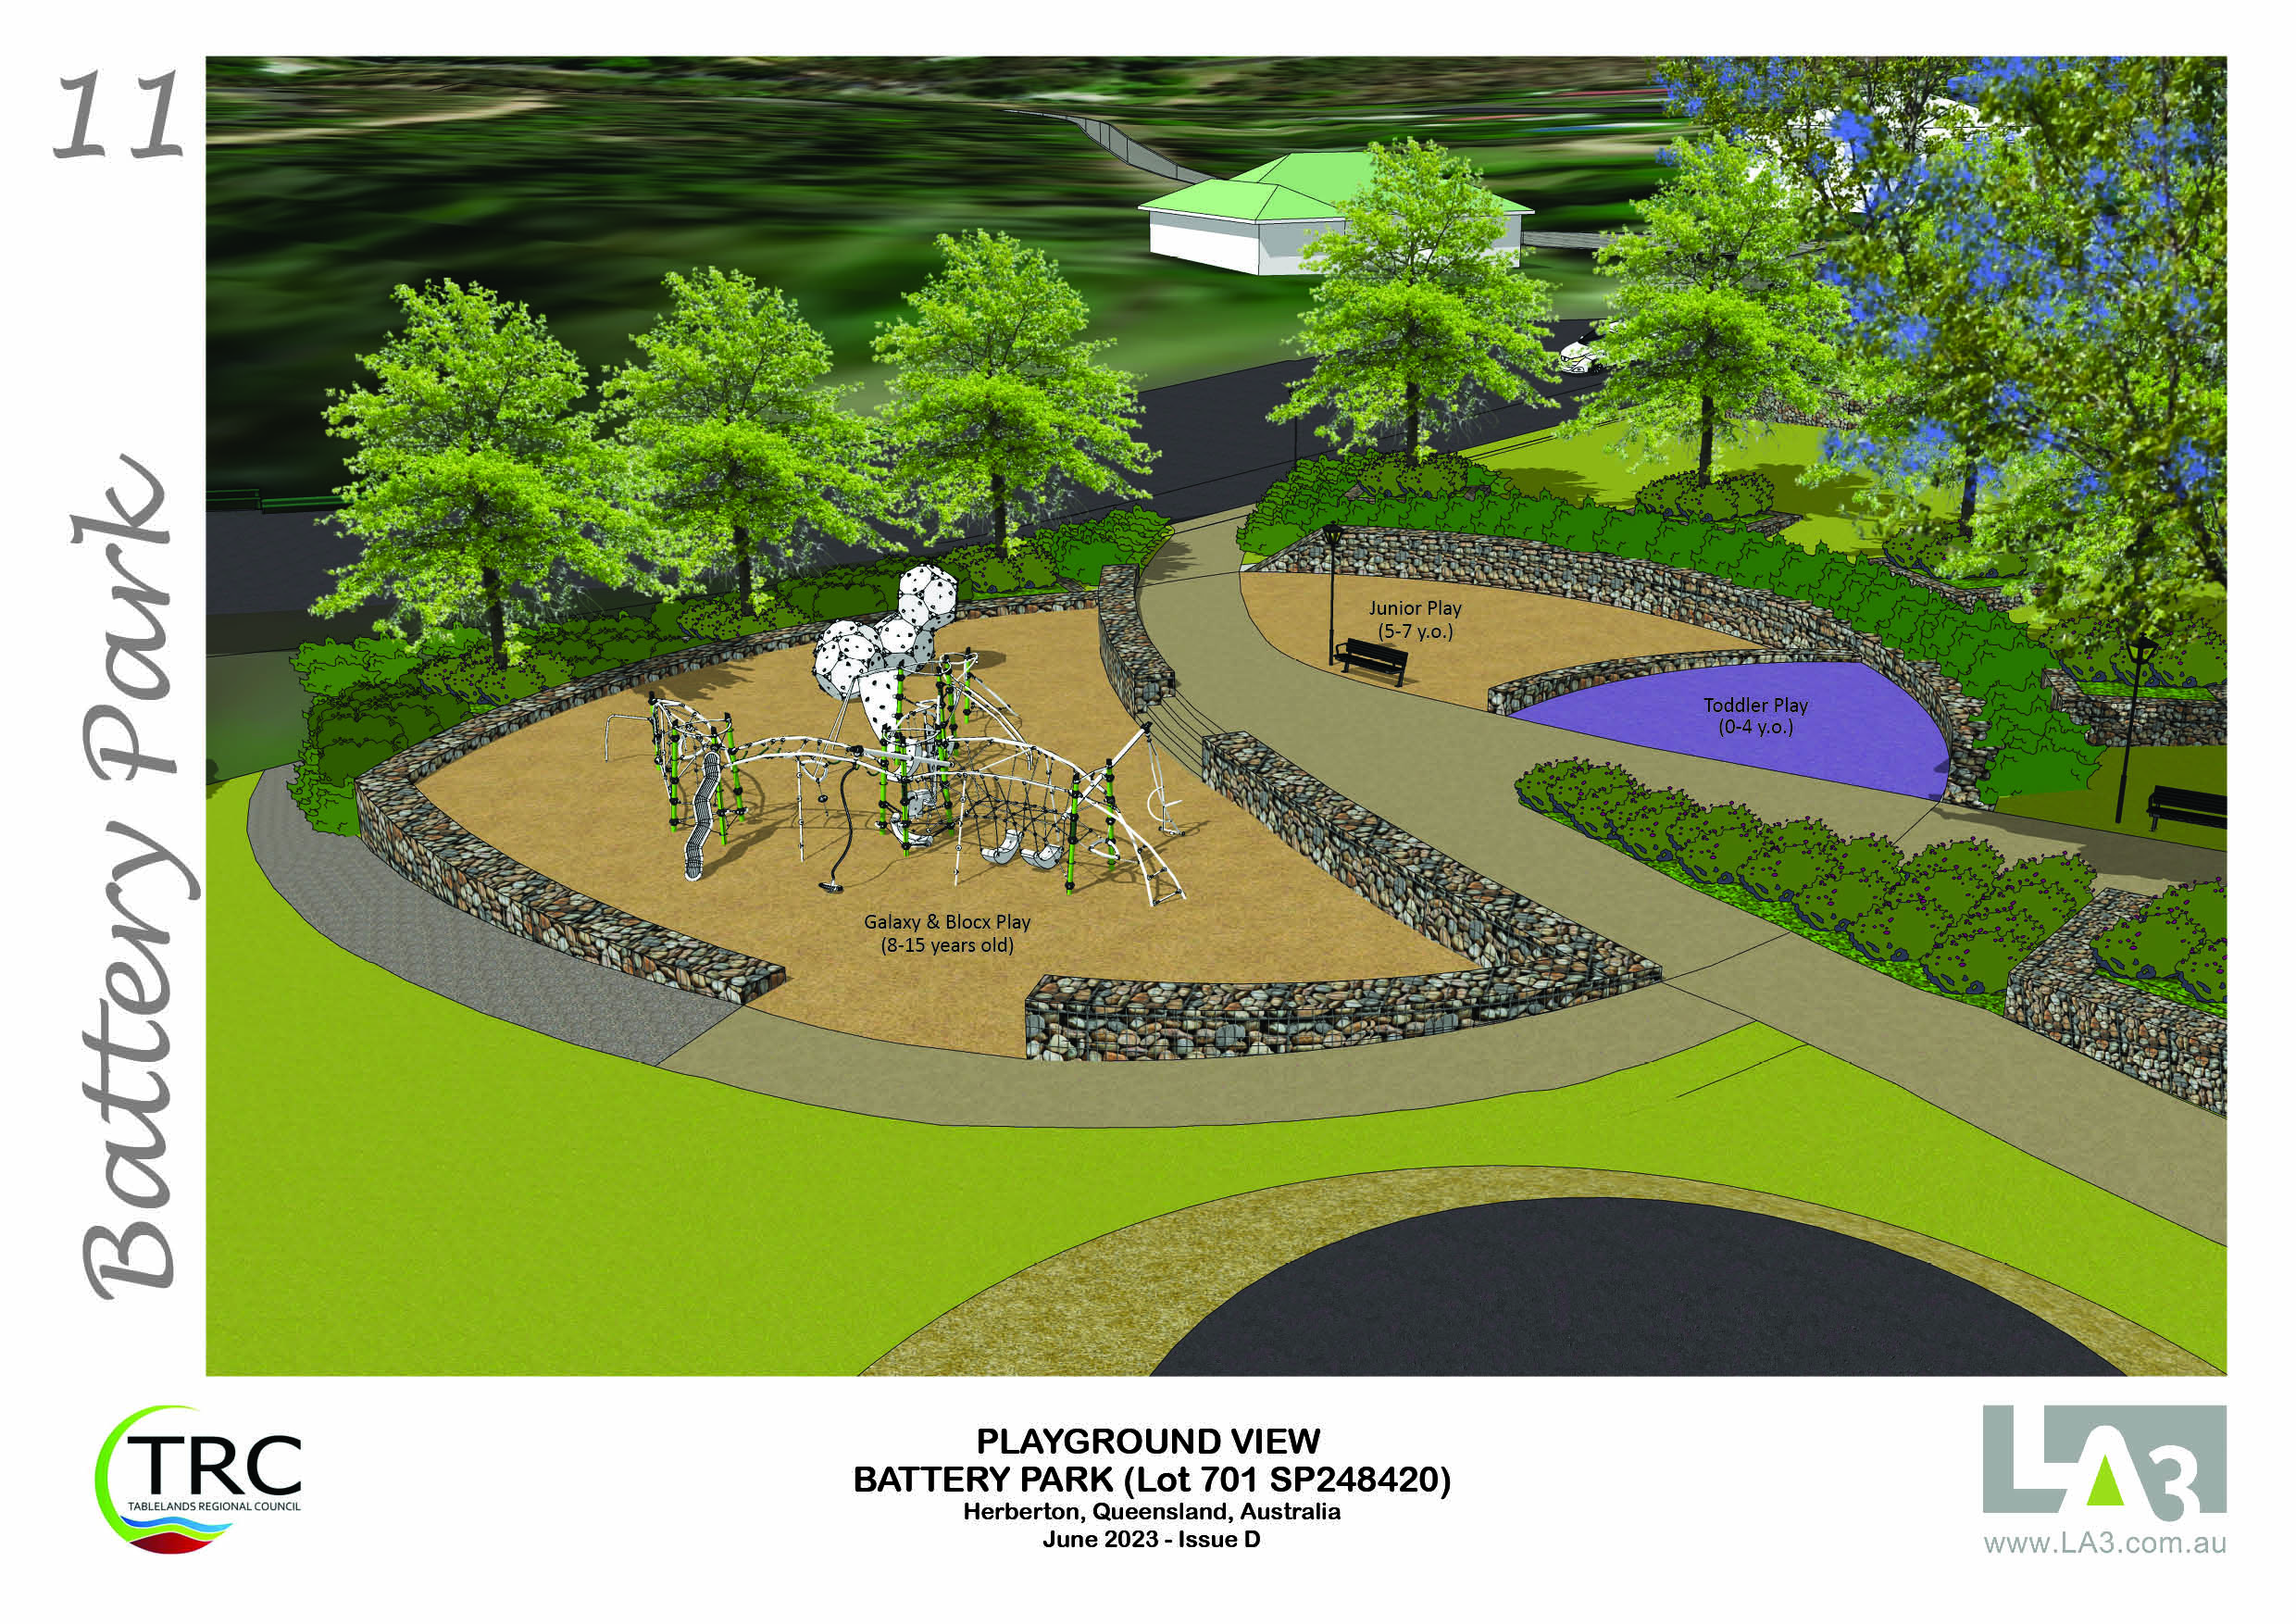 An artist impression of a playground at Herberton Battery Park